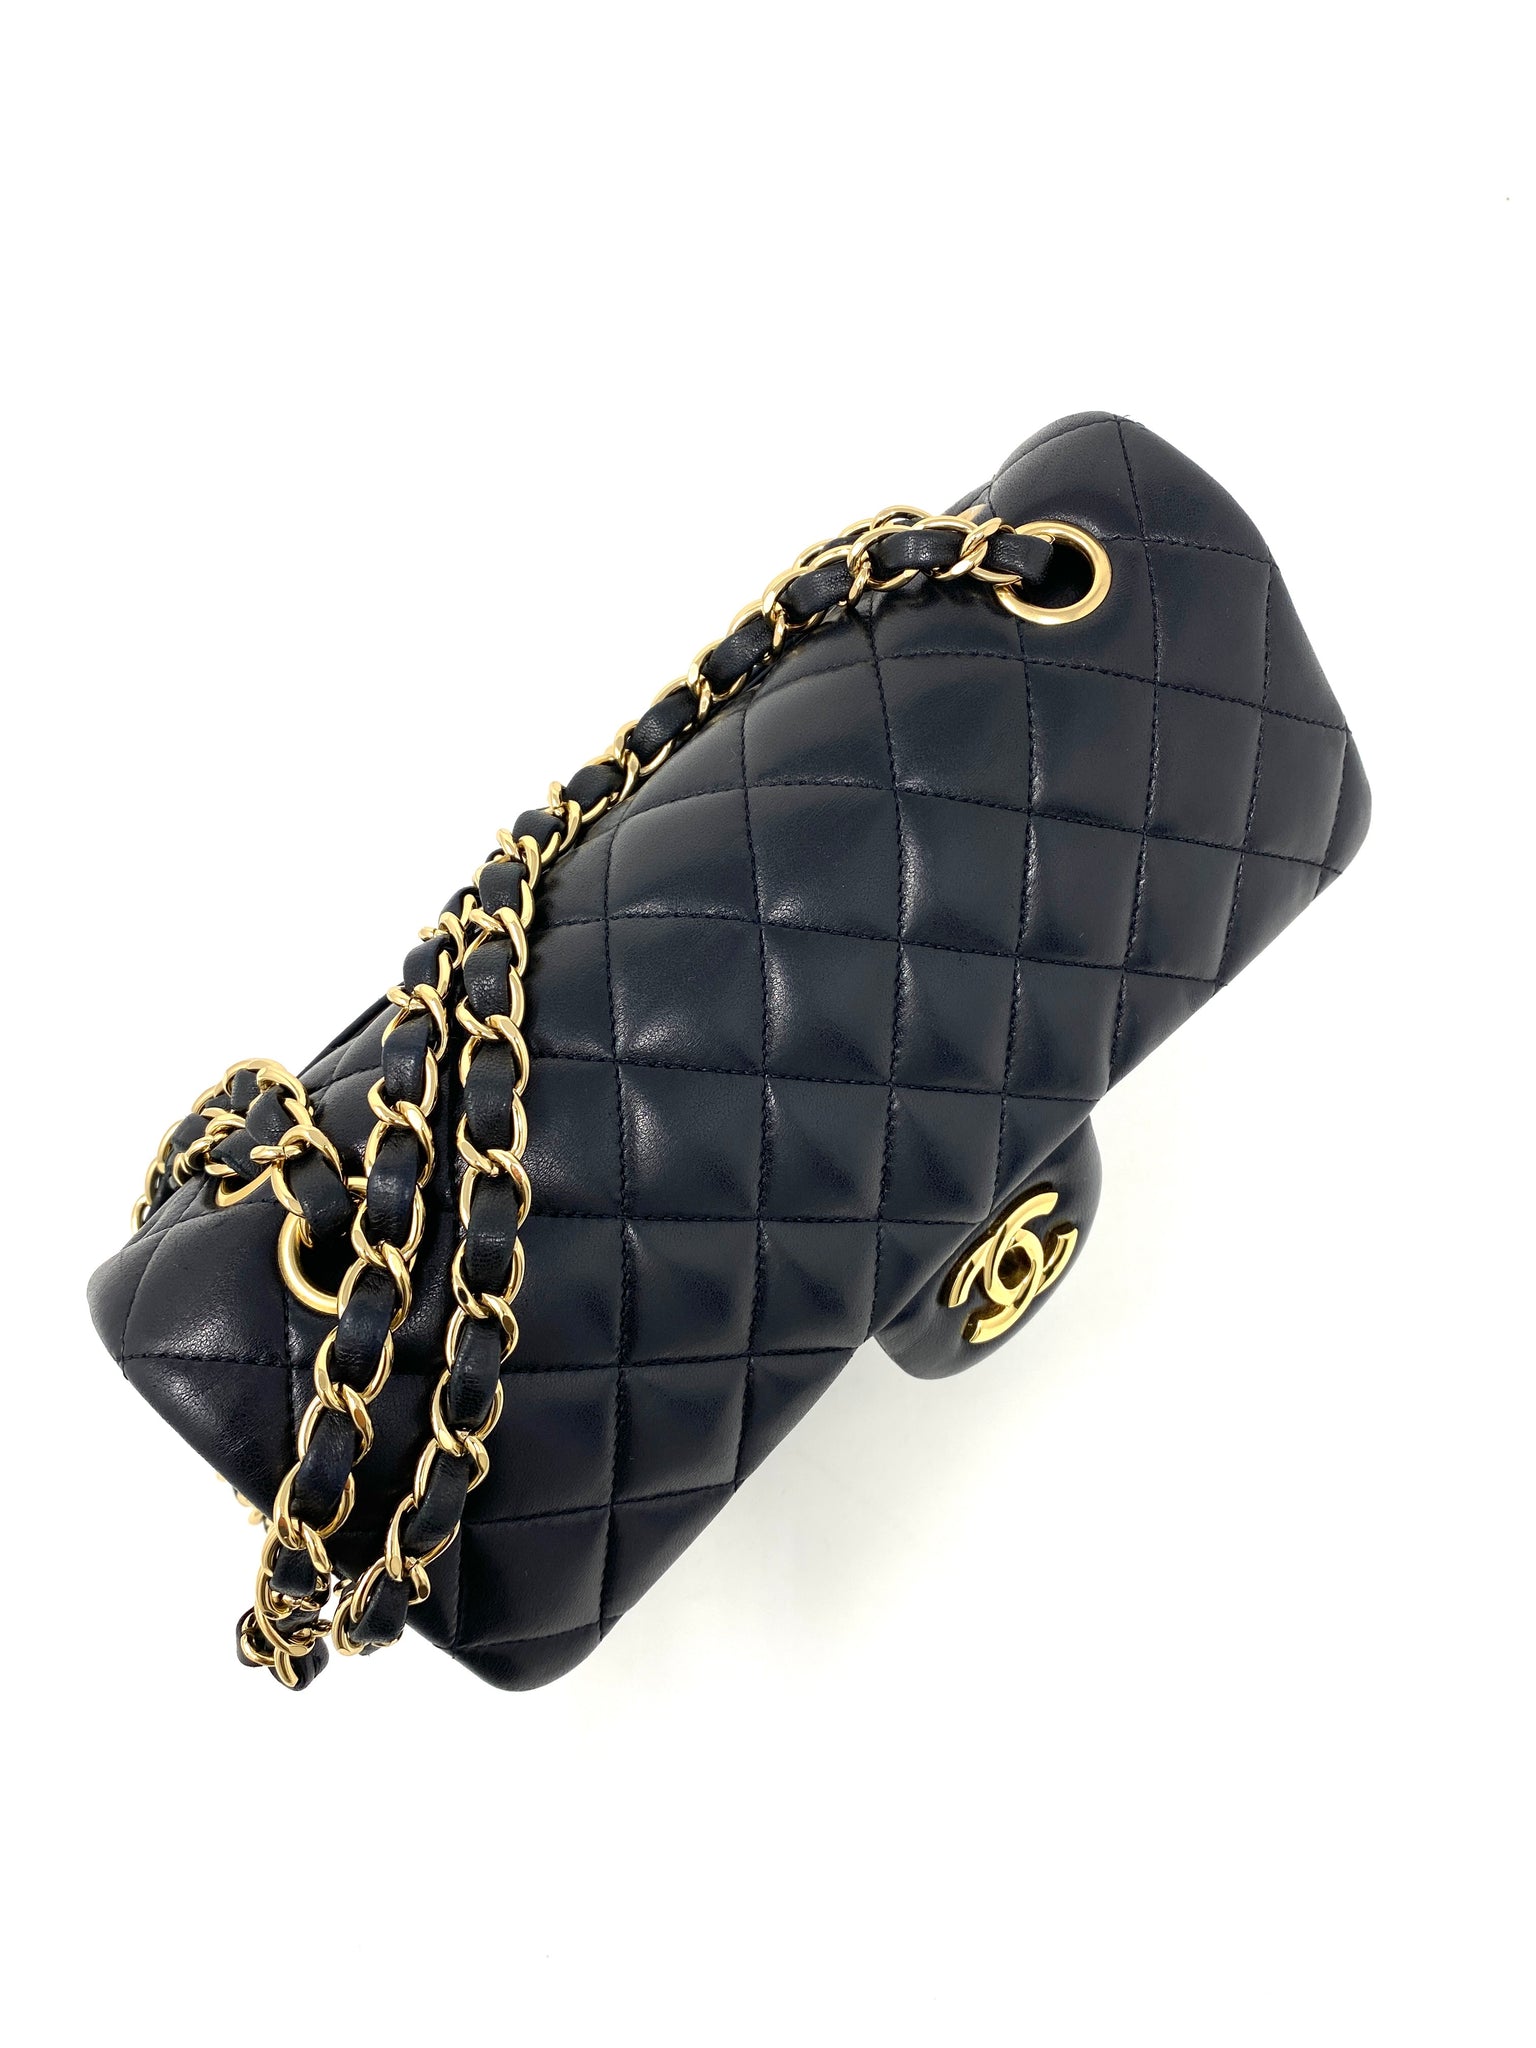 Chanel Timeless Classic Medium Flap Bag In Black Quilted Lambskin With Gold  Metallic Hardware